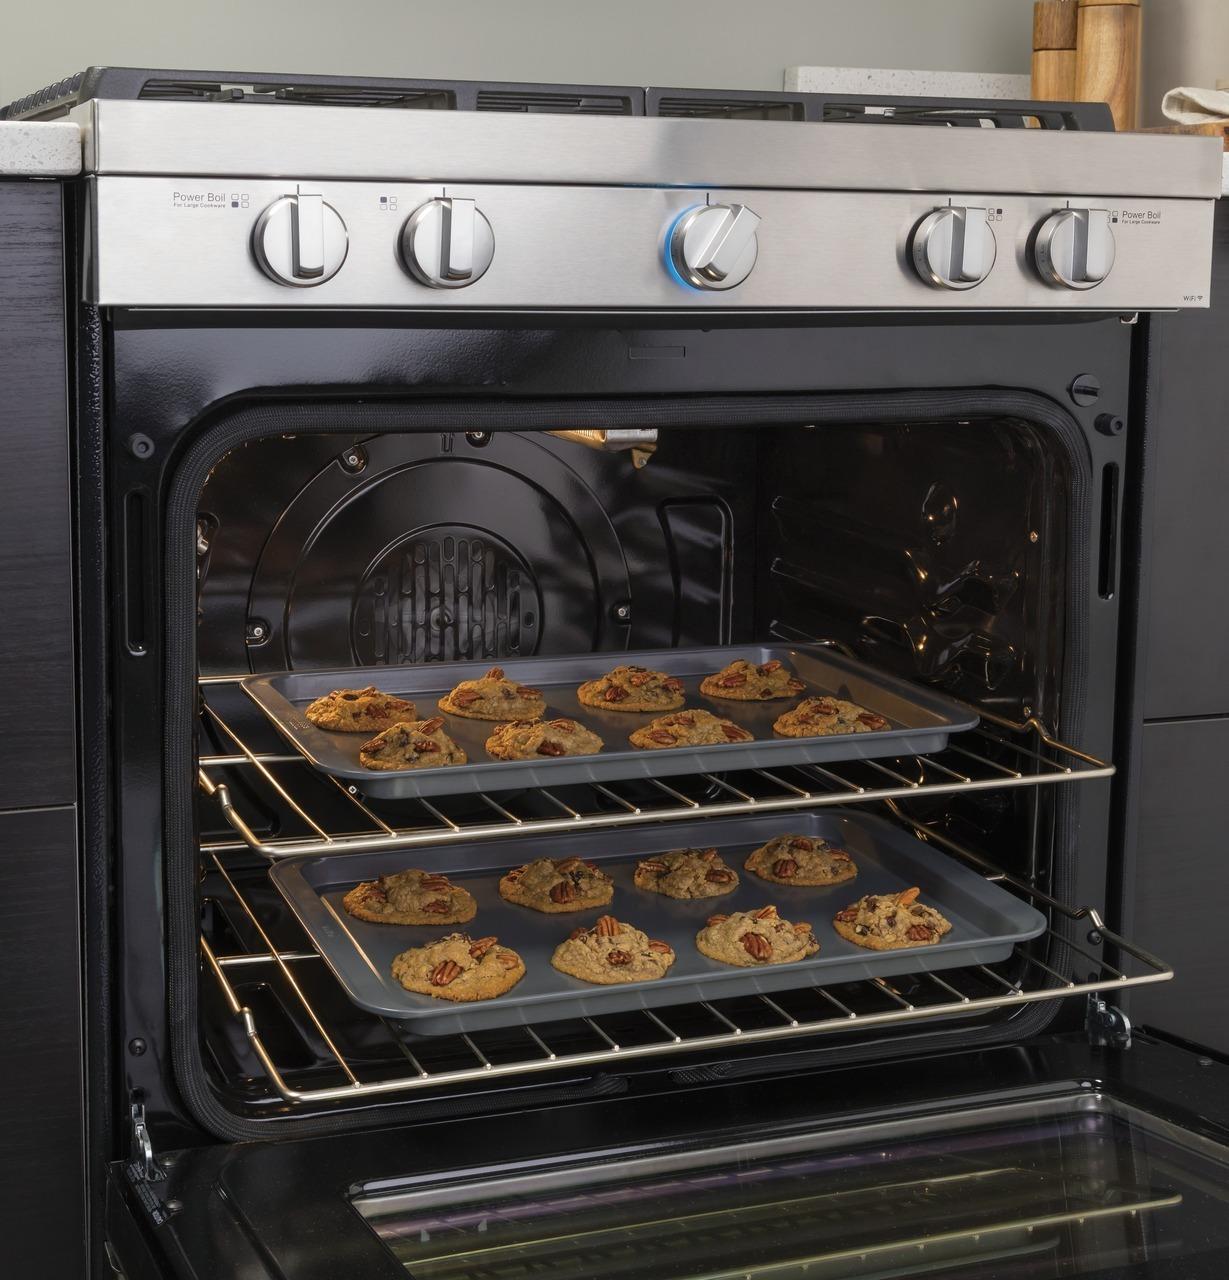 Haier 30" Smart Slide-In Gas Range with Convection